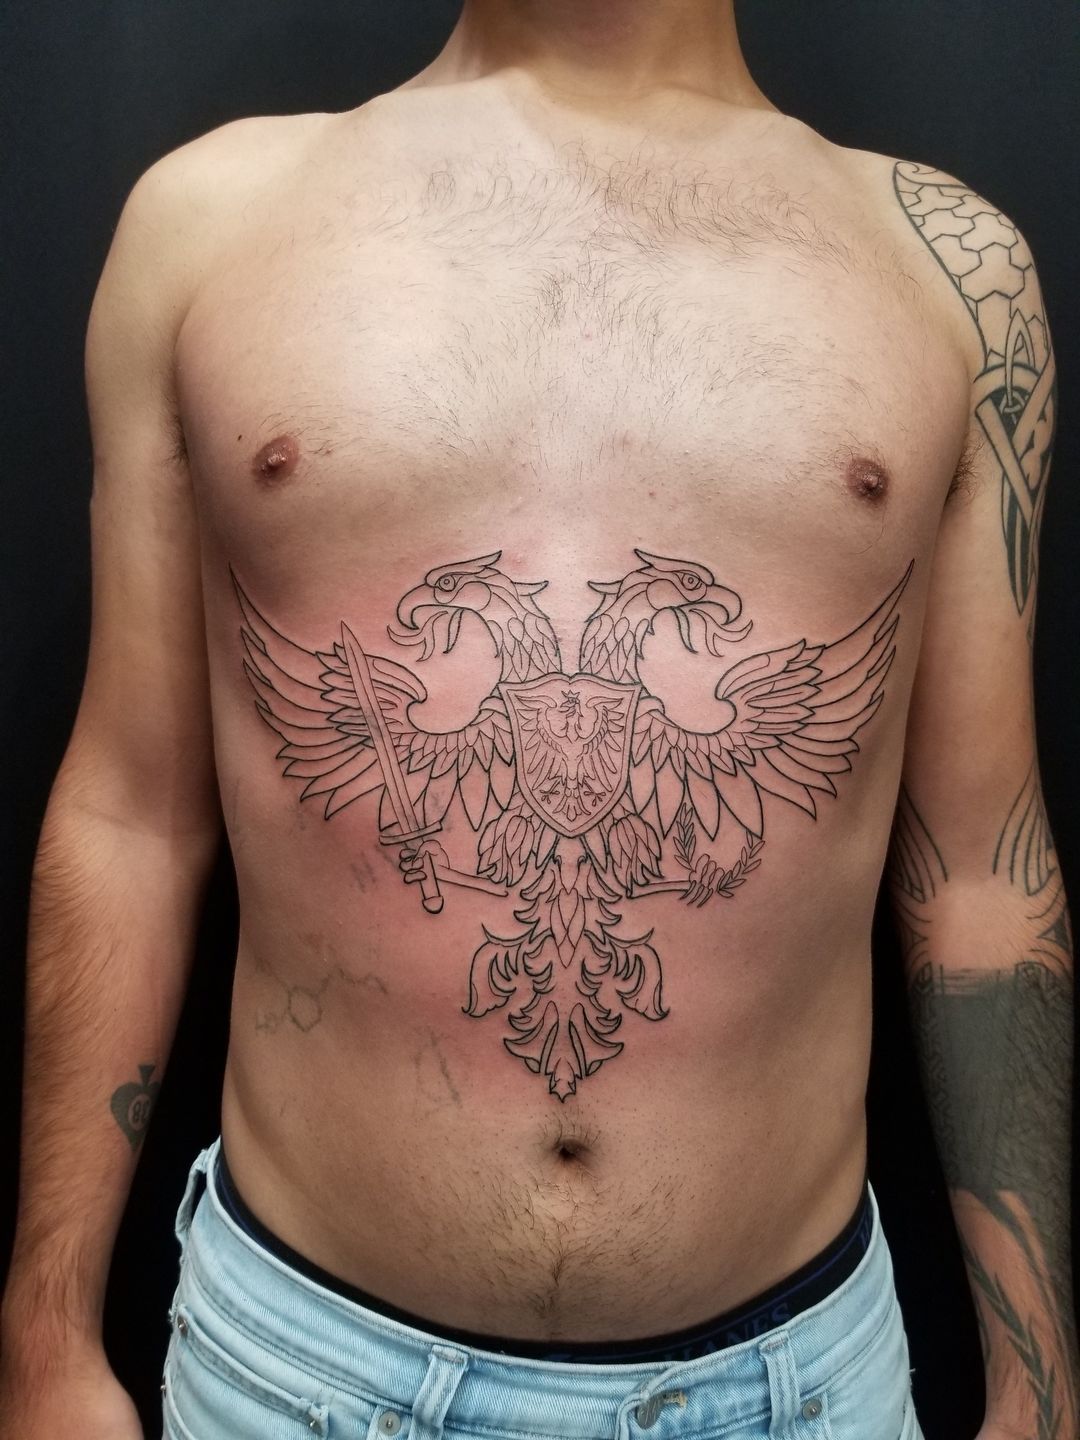 Family Crest Tattoo Images  Designs